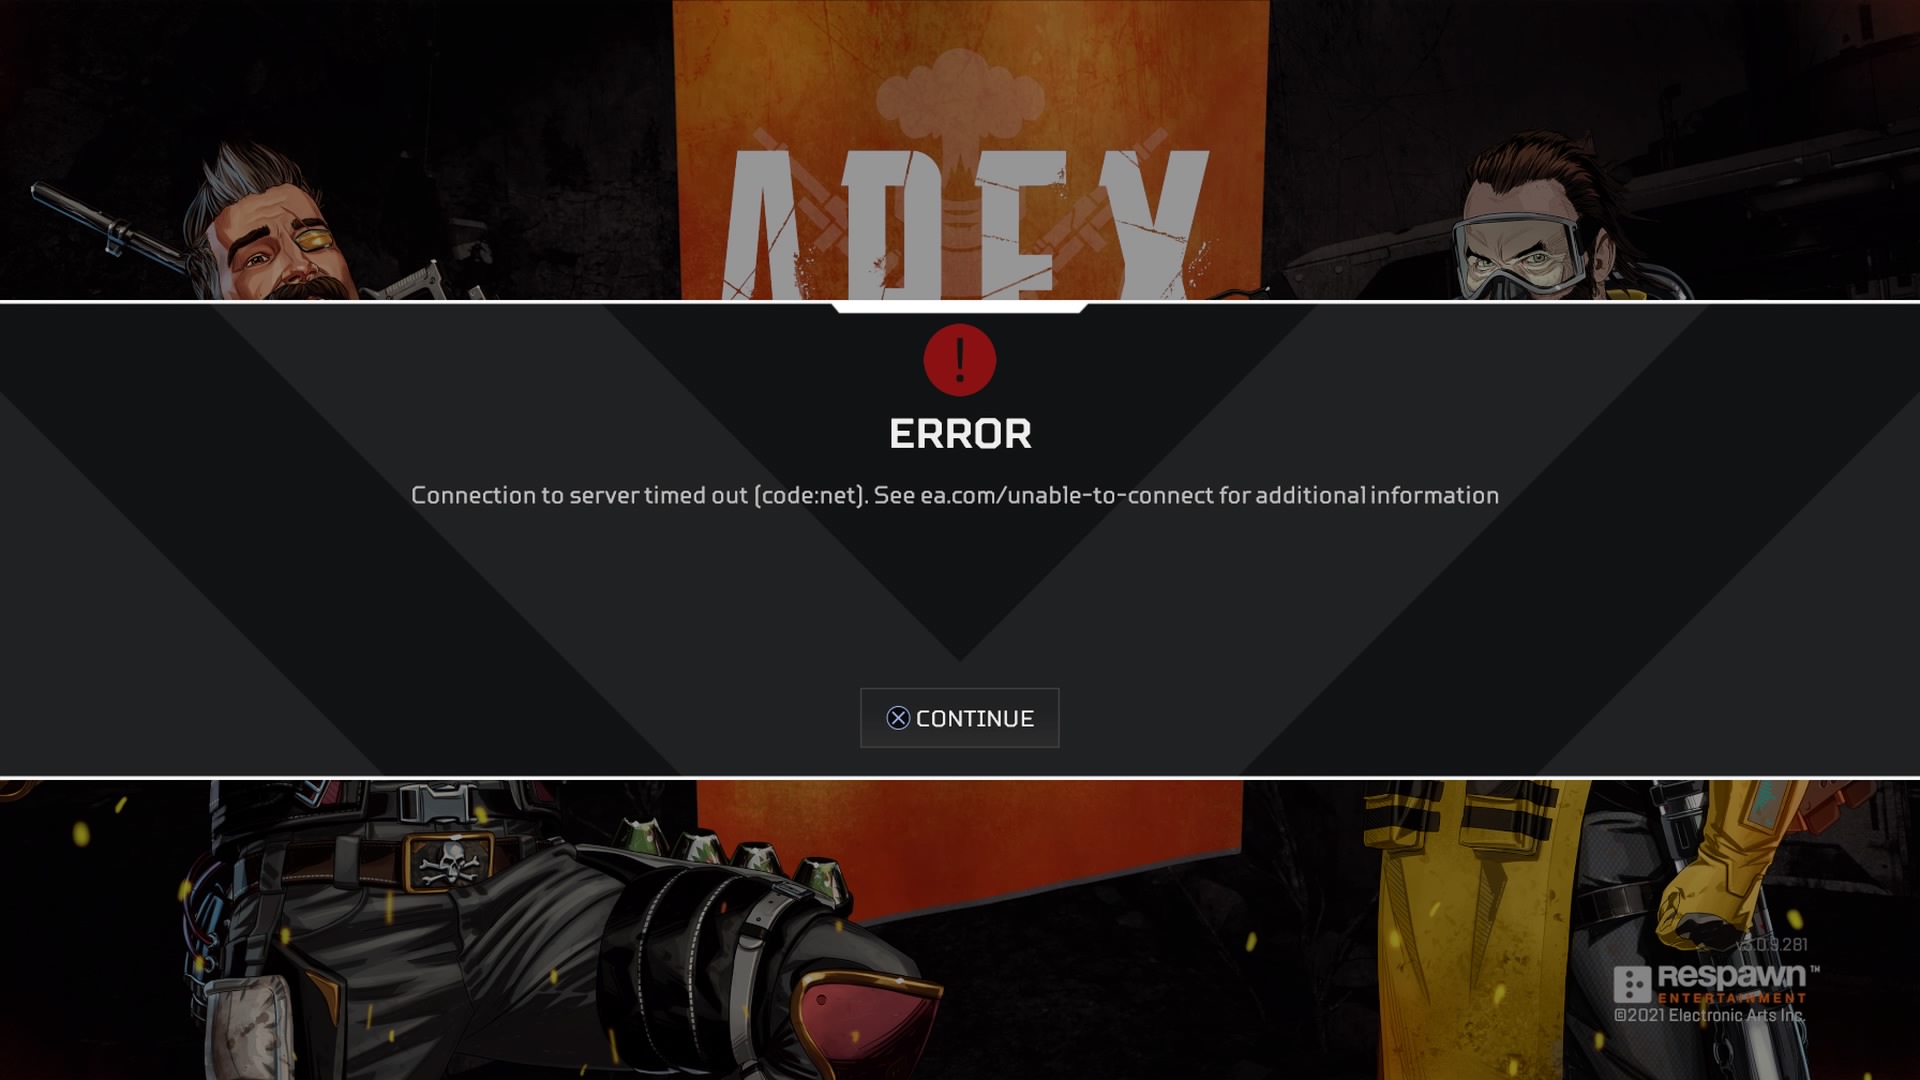 Fatal error online session missing please make sure steam is running фото 88